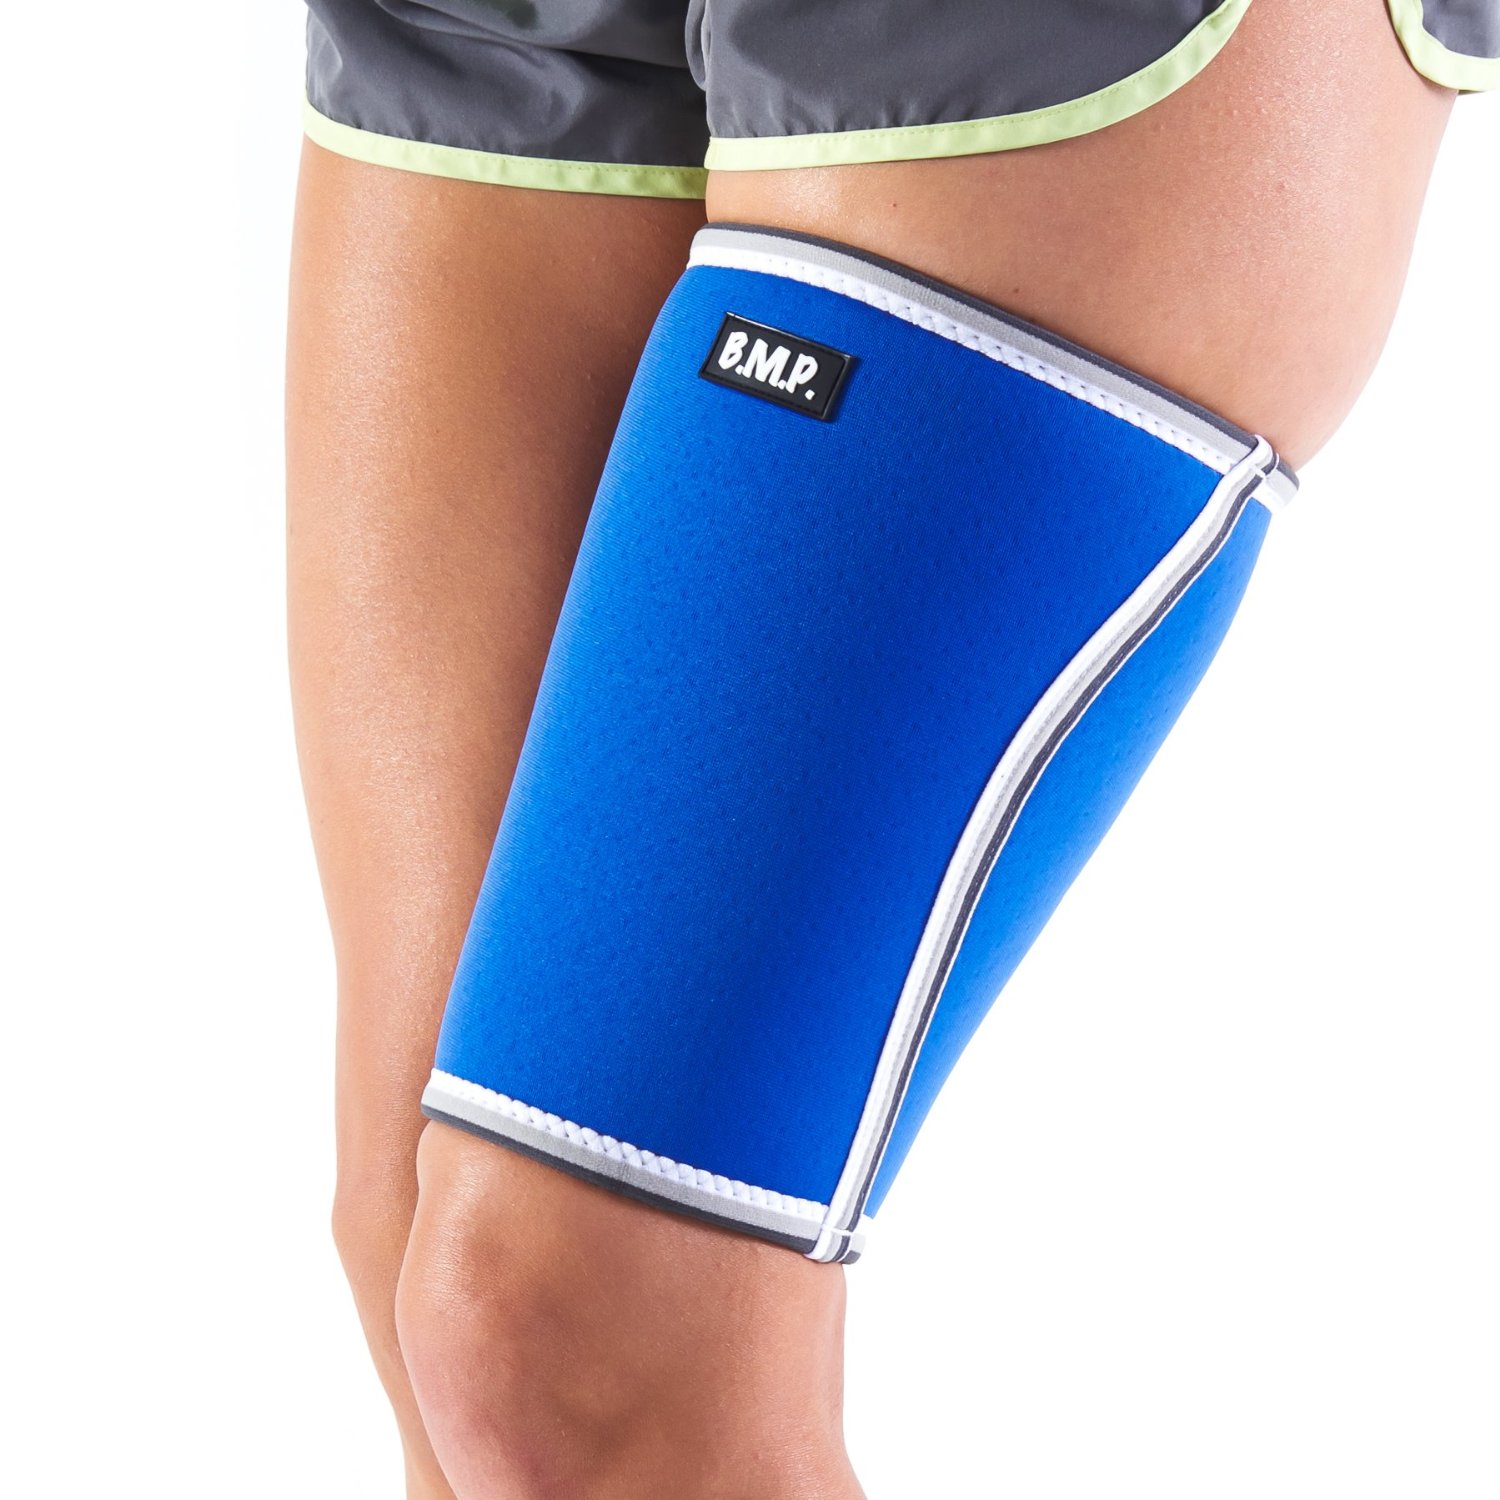 https://blackmountainproducts.com/wp-content/uploads/2015/11/Thigh-Brace-Extra-Thick-Warming-Blue-Hero.jpg